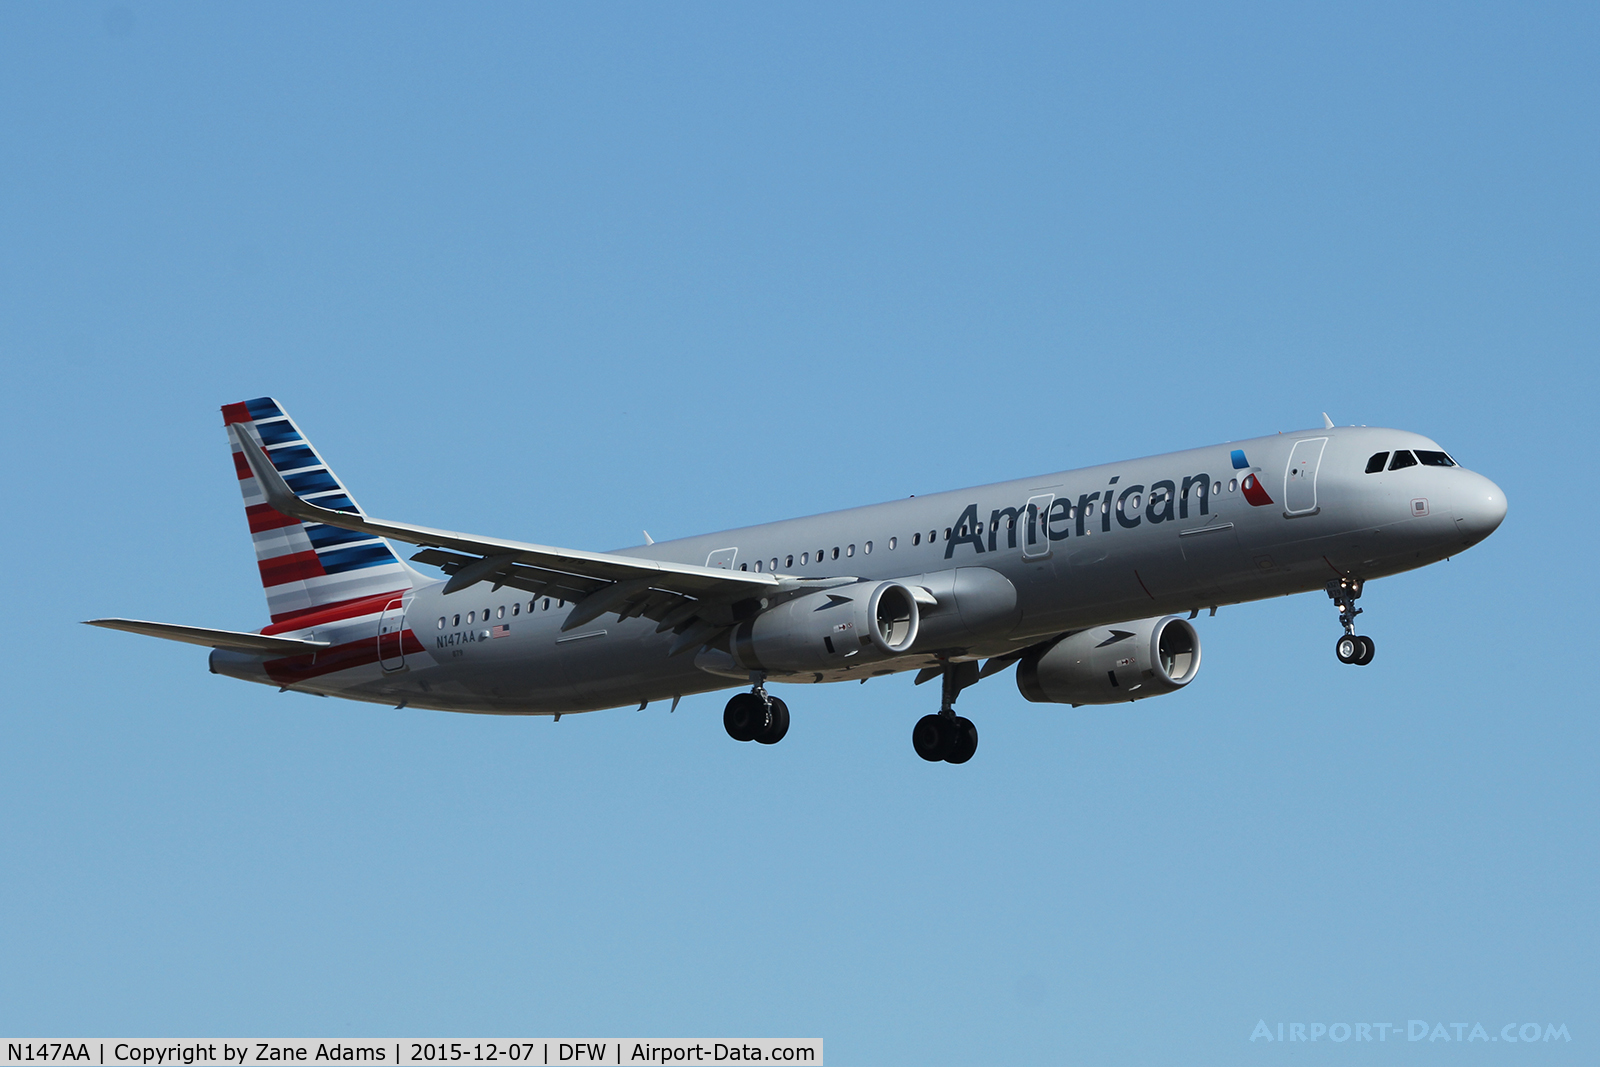 N147AA, 2015 Airbus A321-231 C/N 6802, American Airlines arriving at DFW Airport